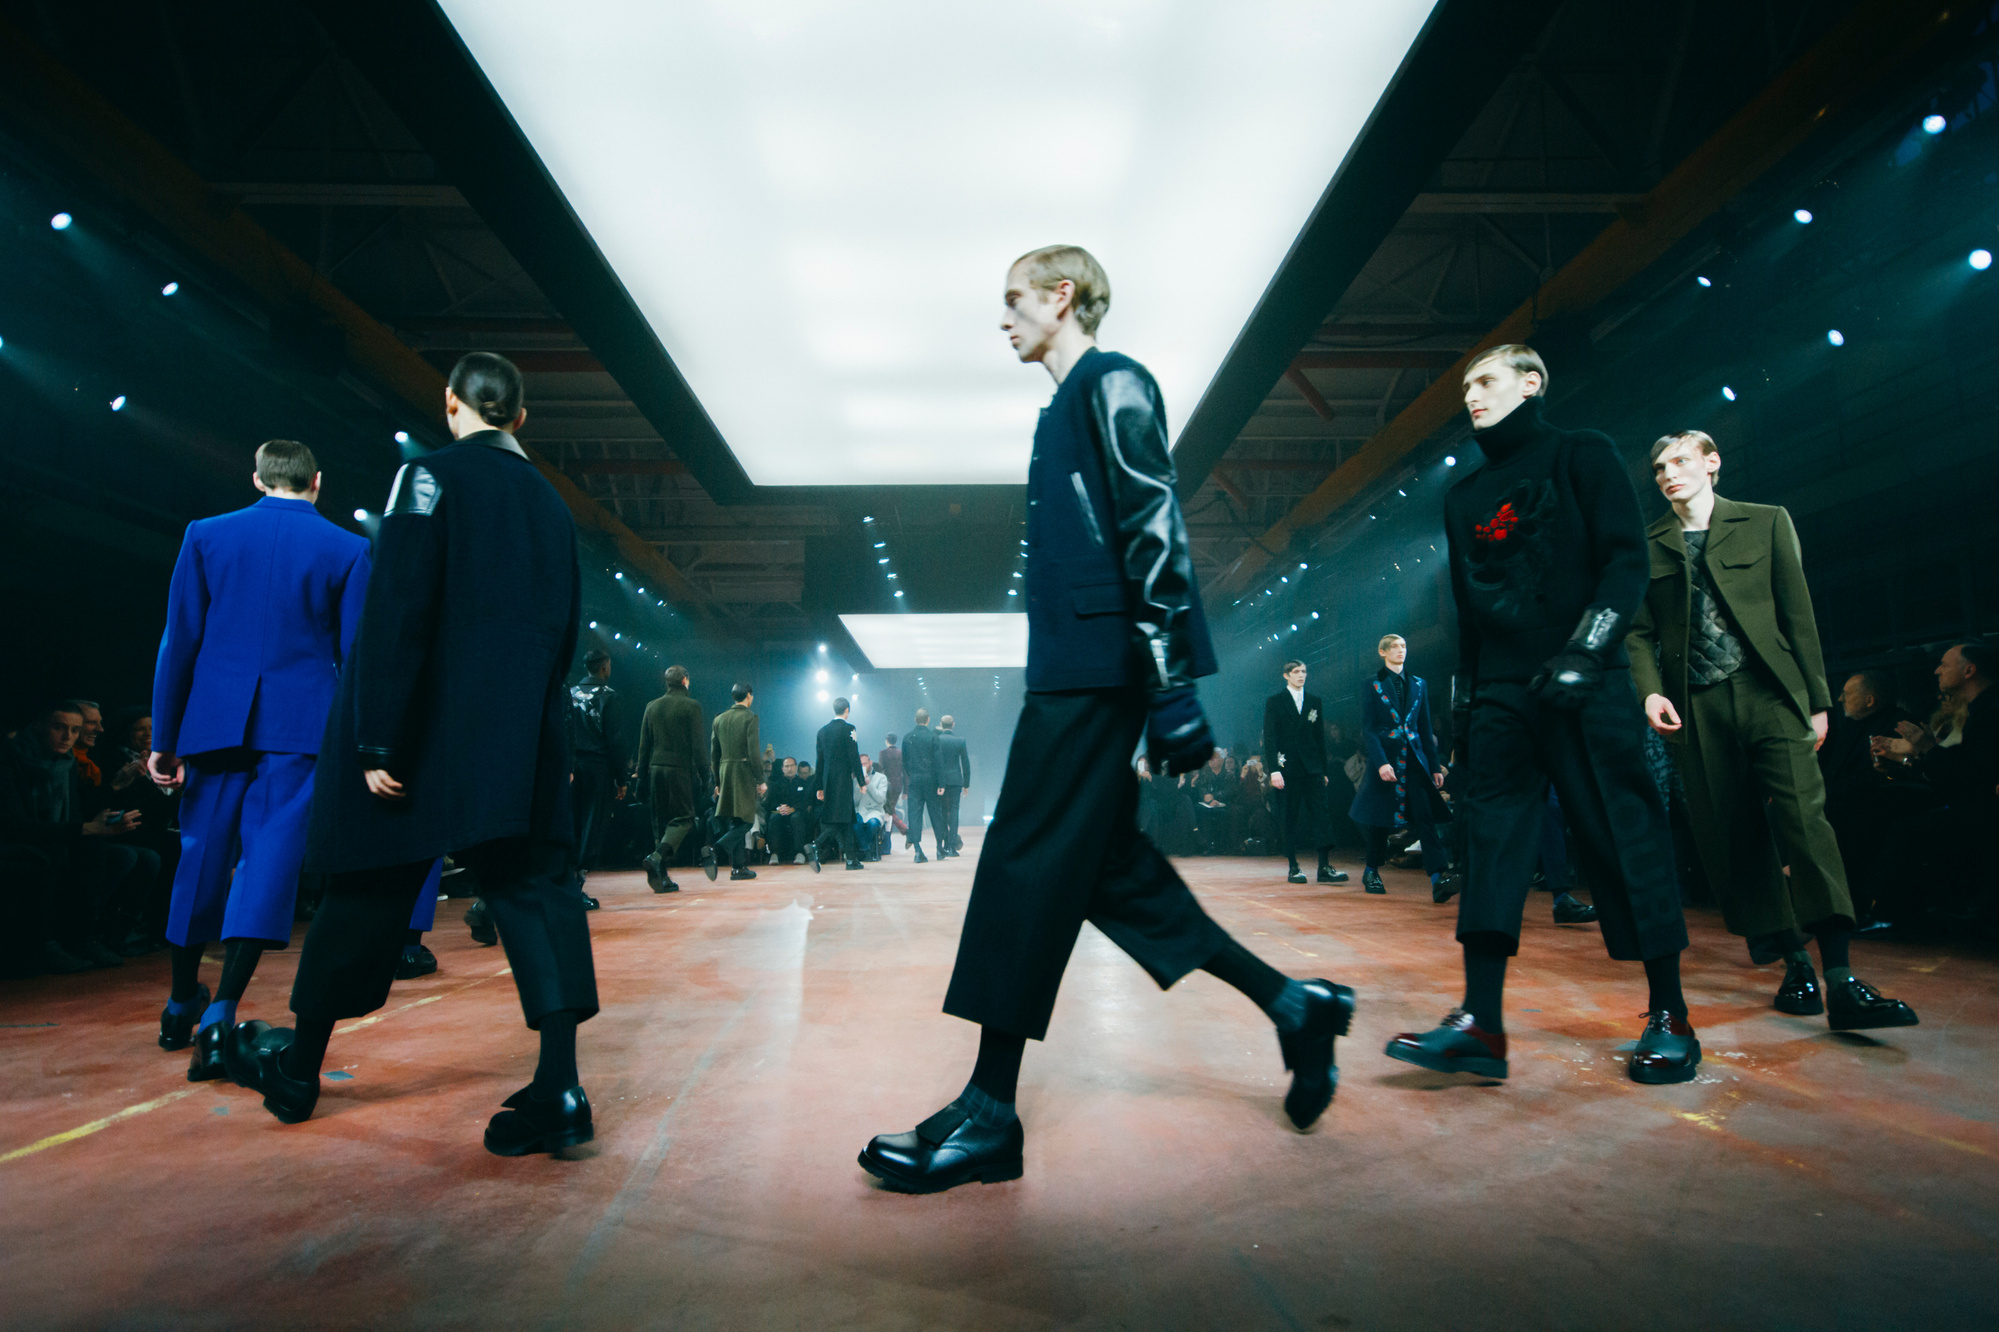 Model wearing chunky shoes by Ryan Lovering for Alexander McQueen mens runway finale Winter 2015